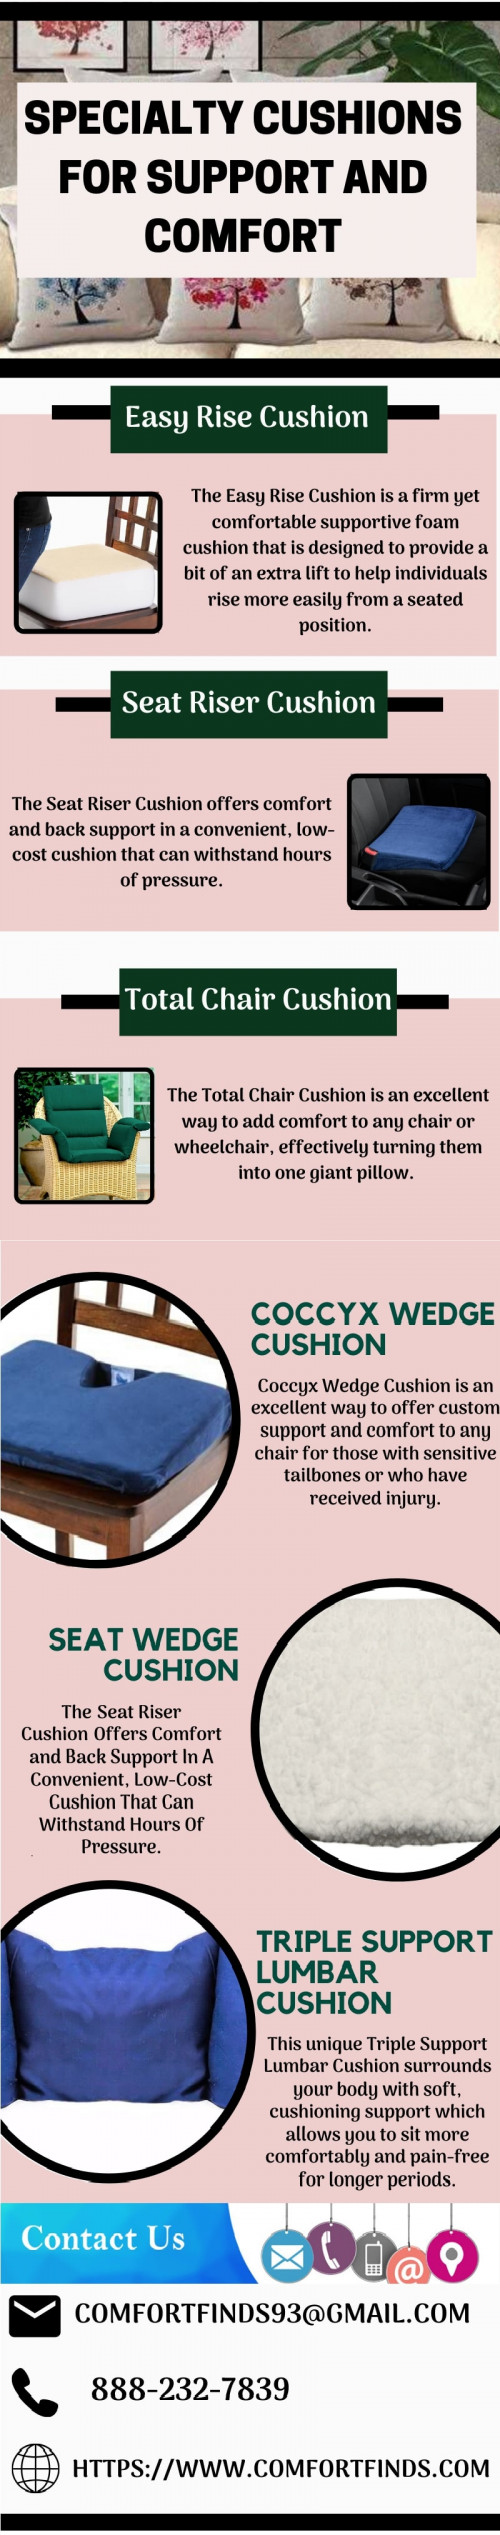 Specialty-Cushions-for-Support-and-Comfort.jpg